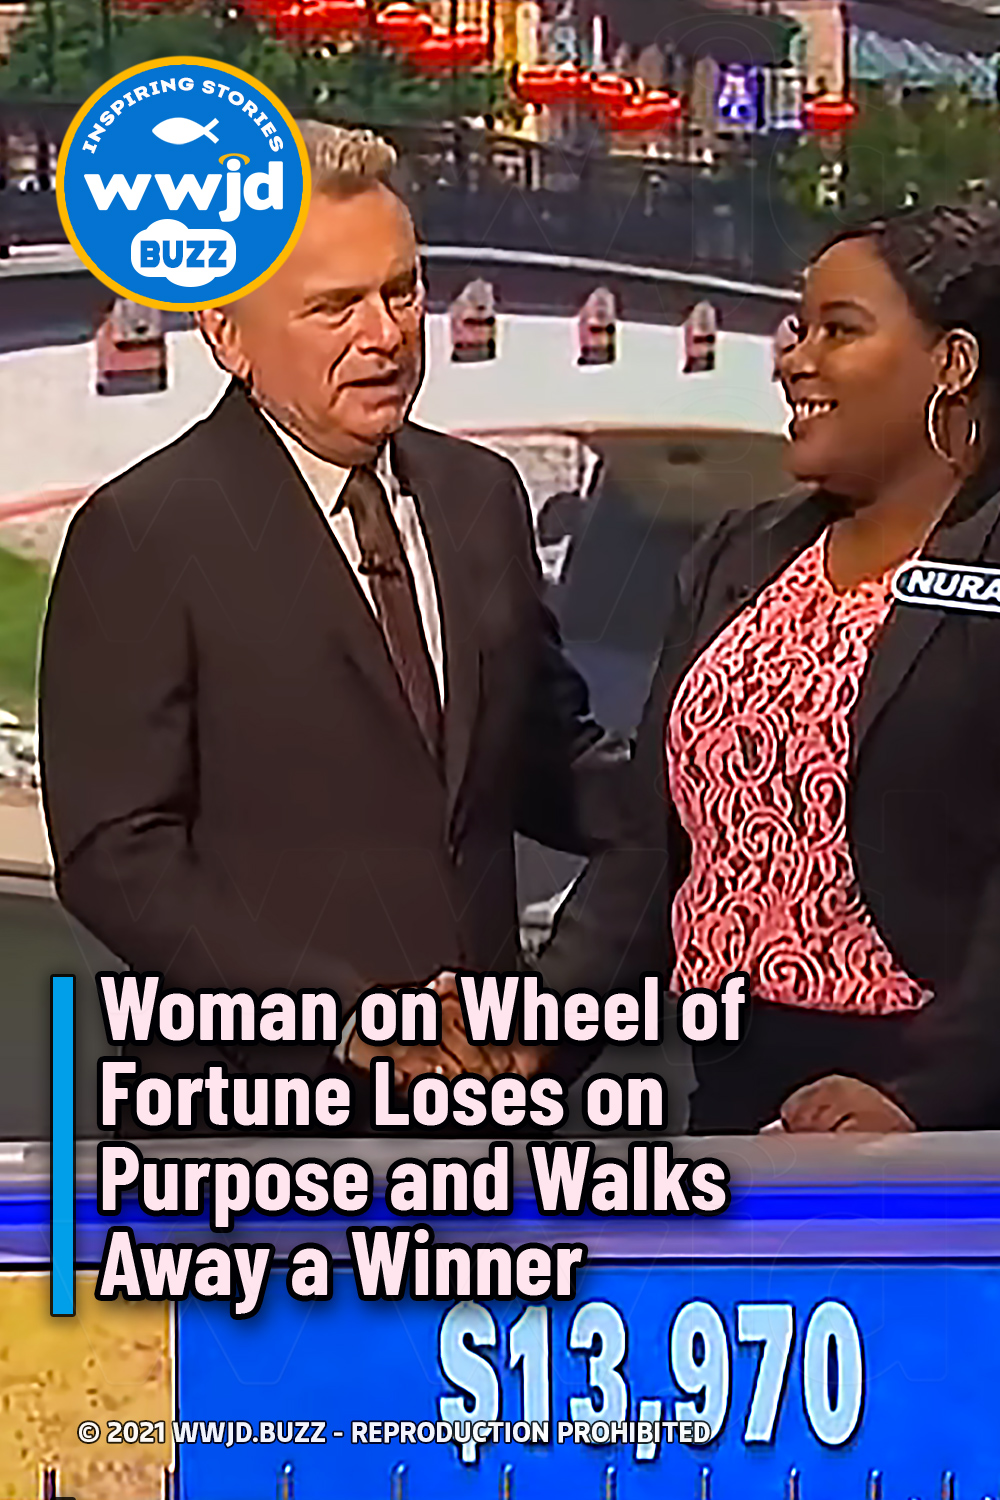 Woman on Wheel of Fortune Loses on Purpose and Walks Away a Winner